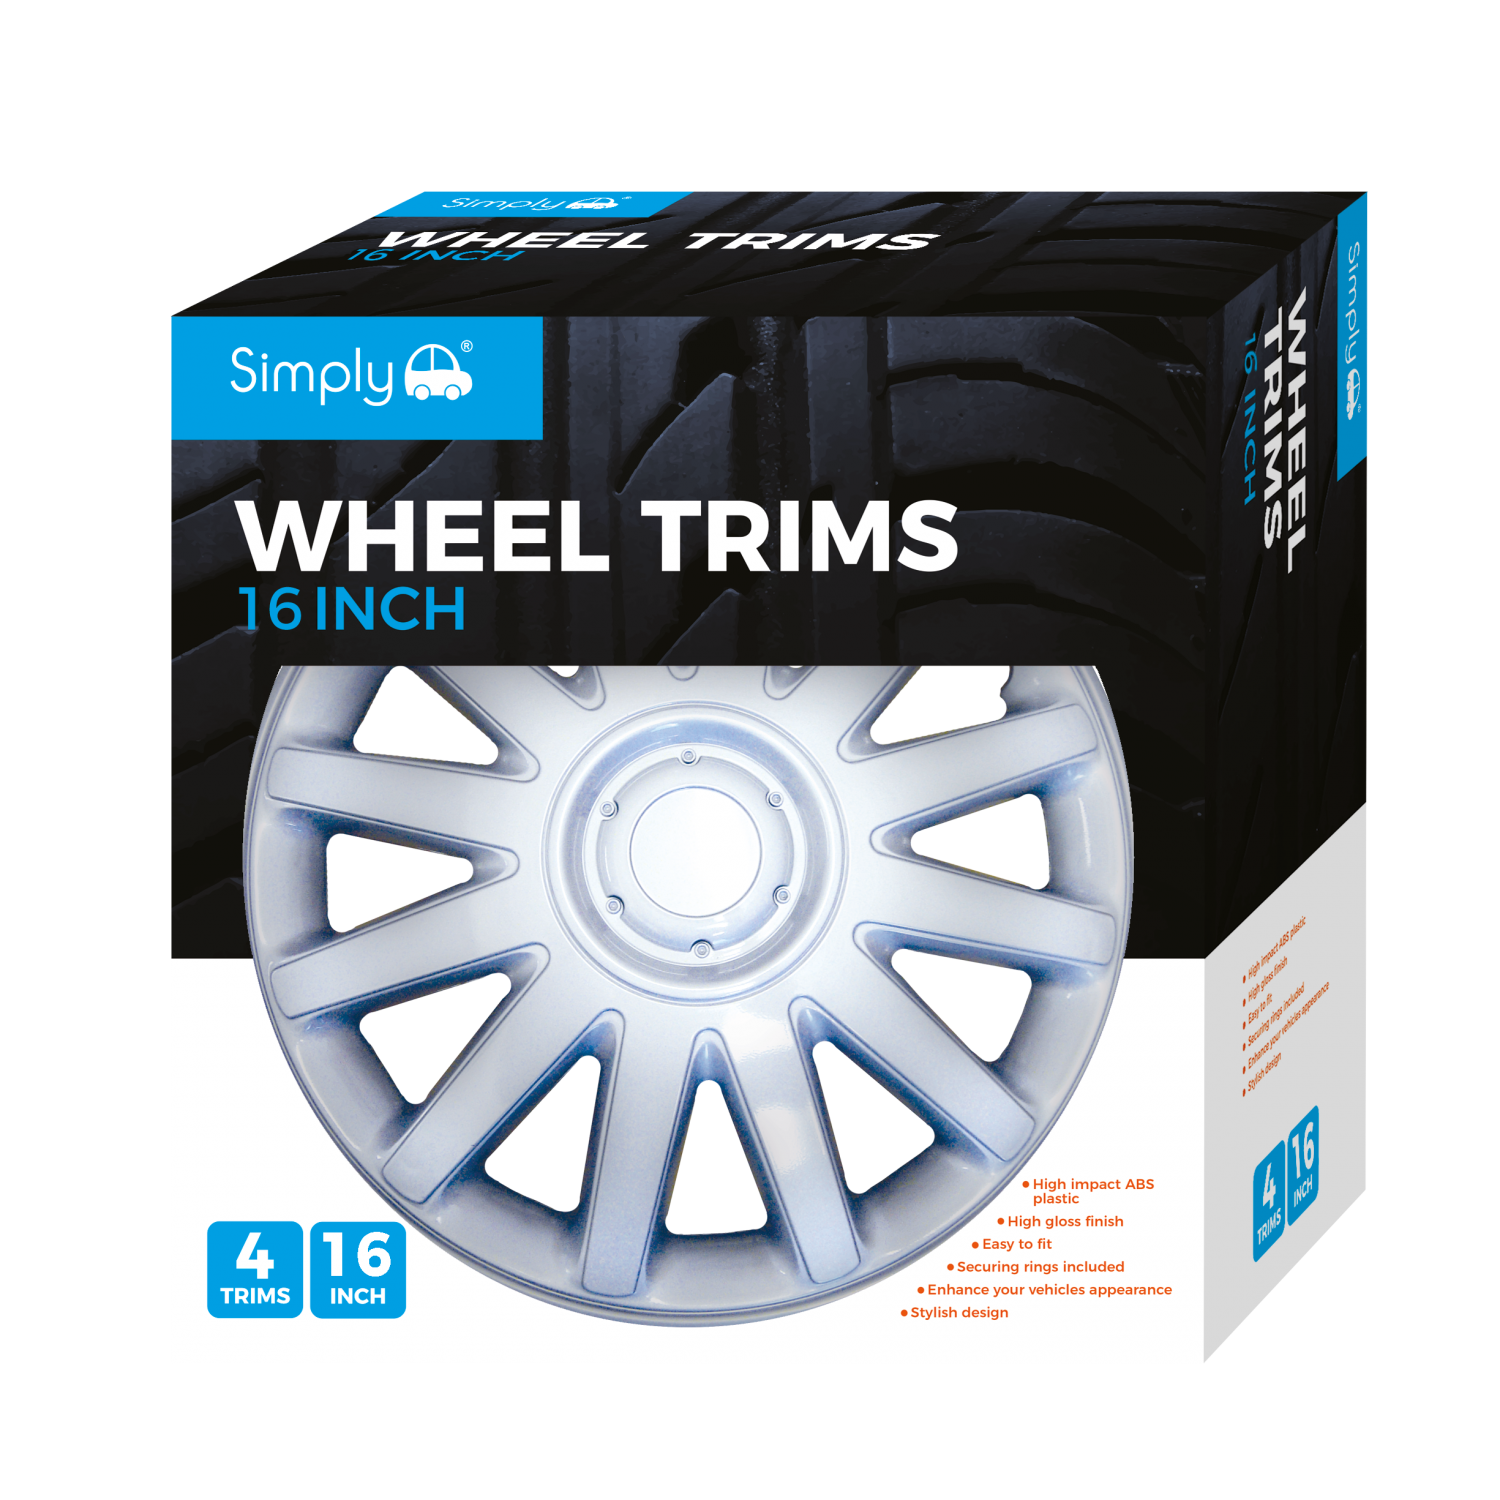 Simply Auto Wheel Trims 16inch - Promotional Image 1